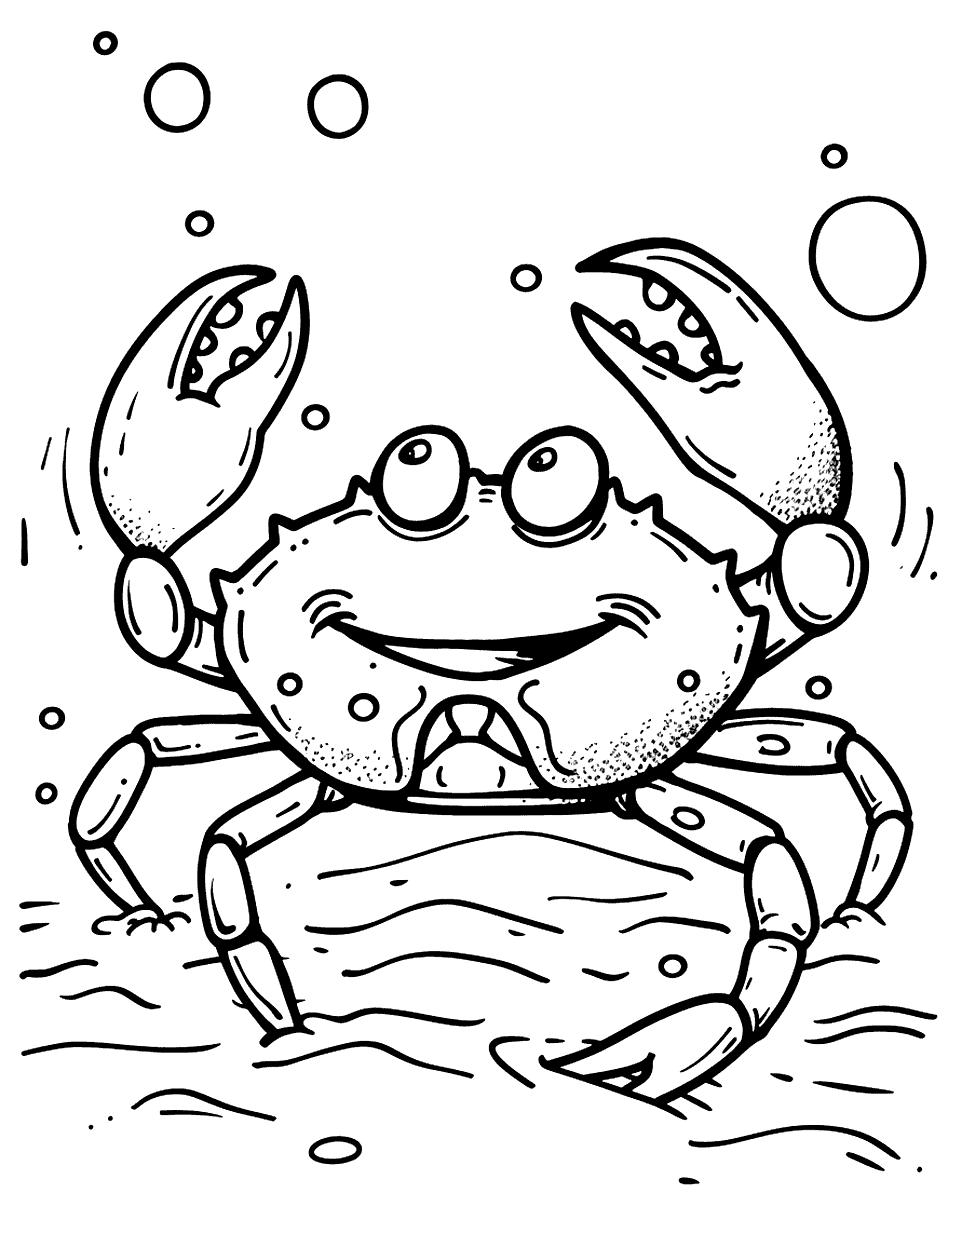 Crabby Dance Crab Coloring Page - A playful crab dancing on the sand, with its claws up in the air and a happy expression.